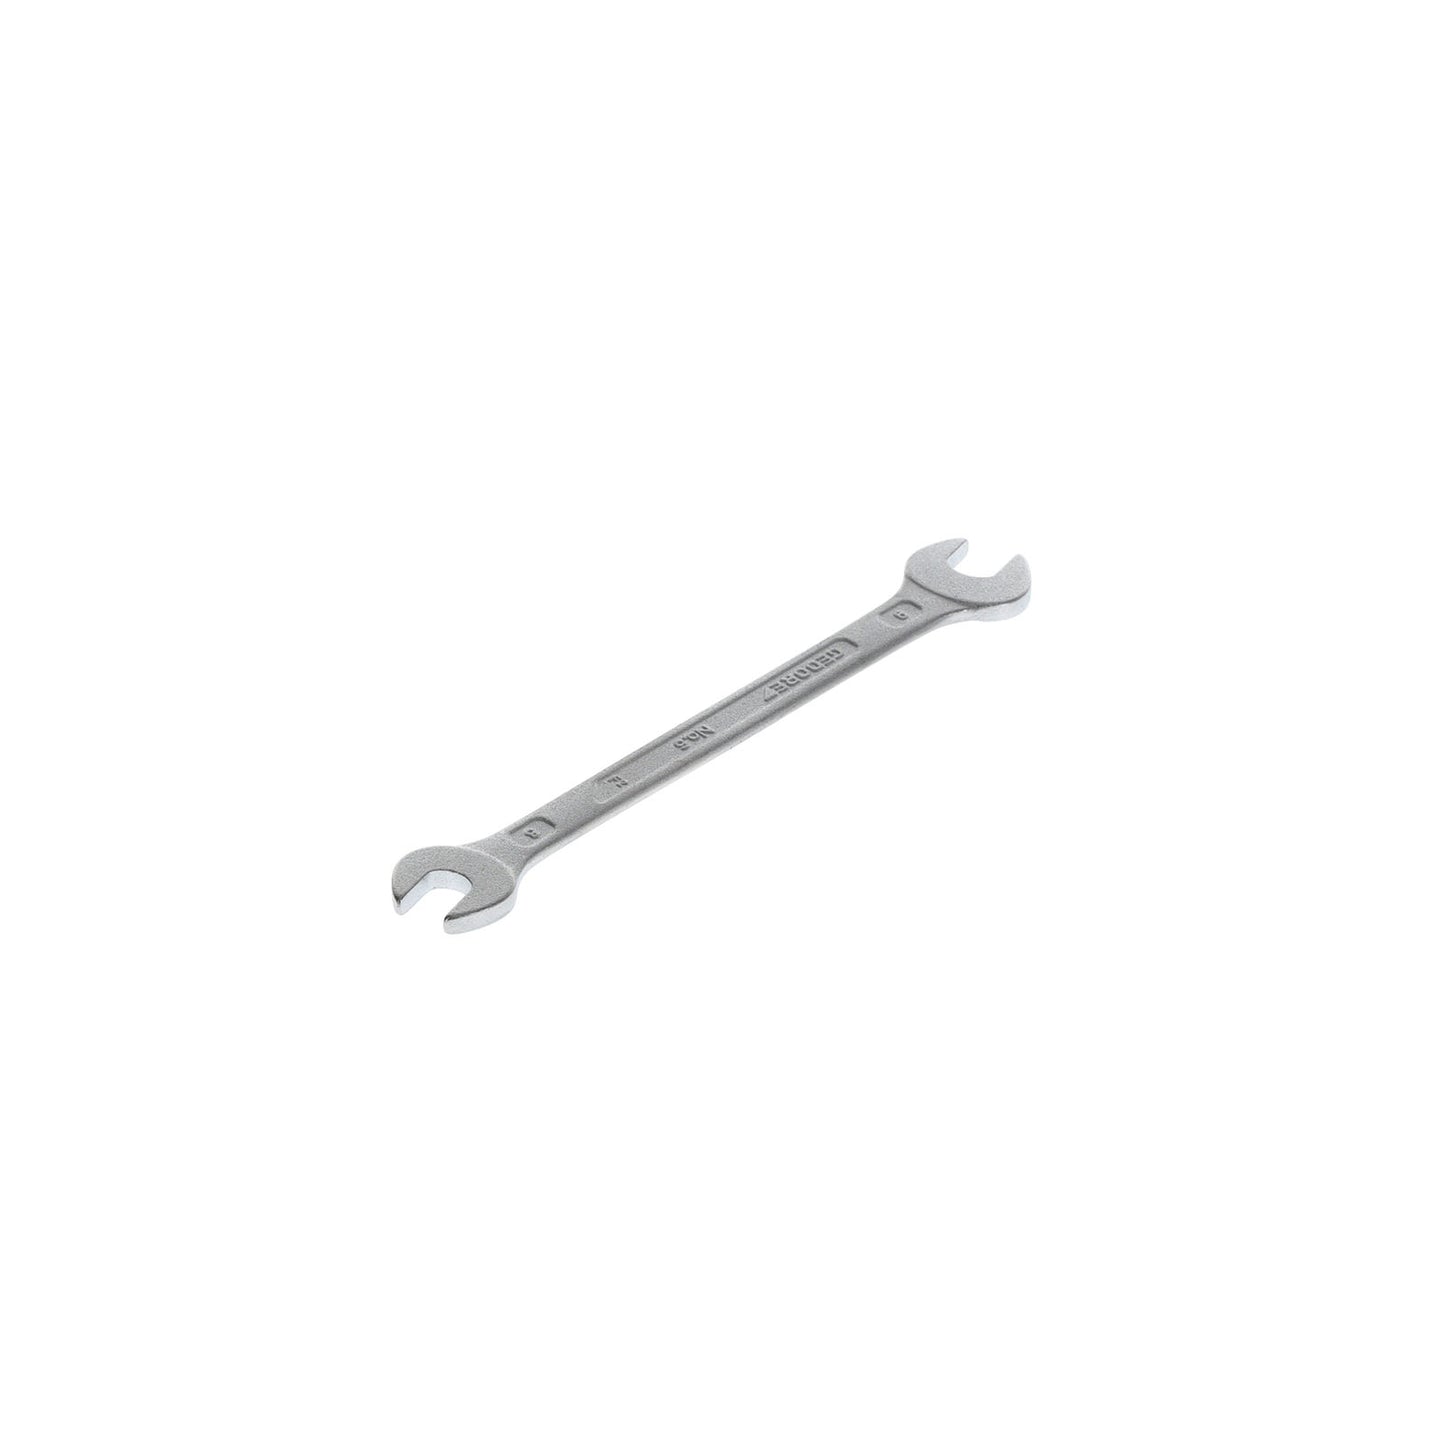 GEDORE 6 8X9 - 2-Mount Fixed Wrench, 8x9 (6064210)